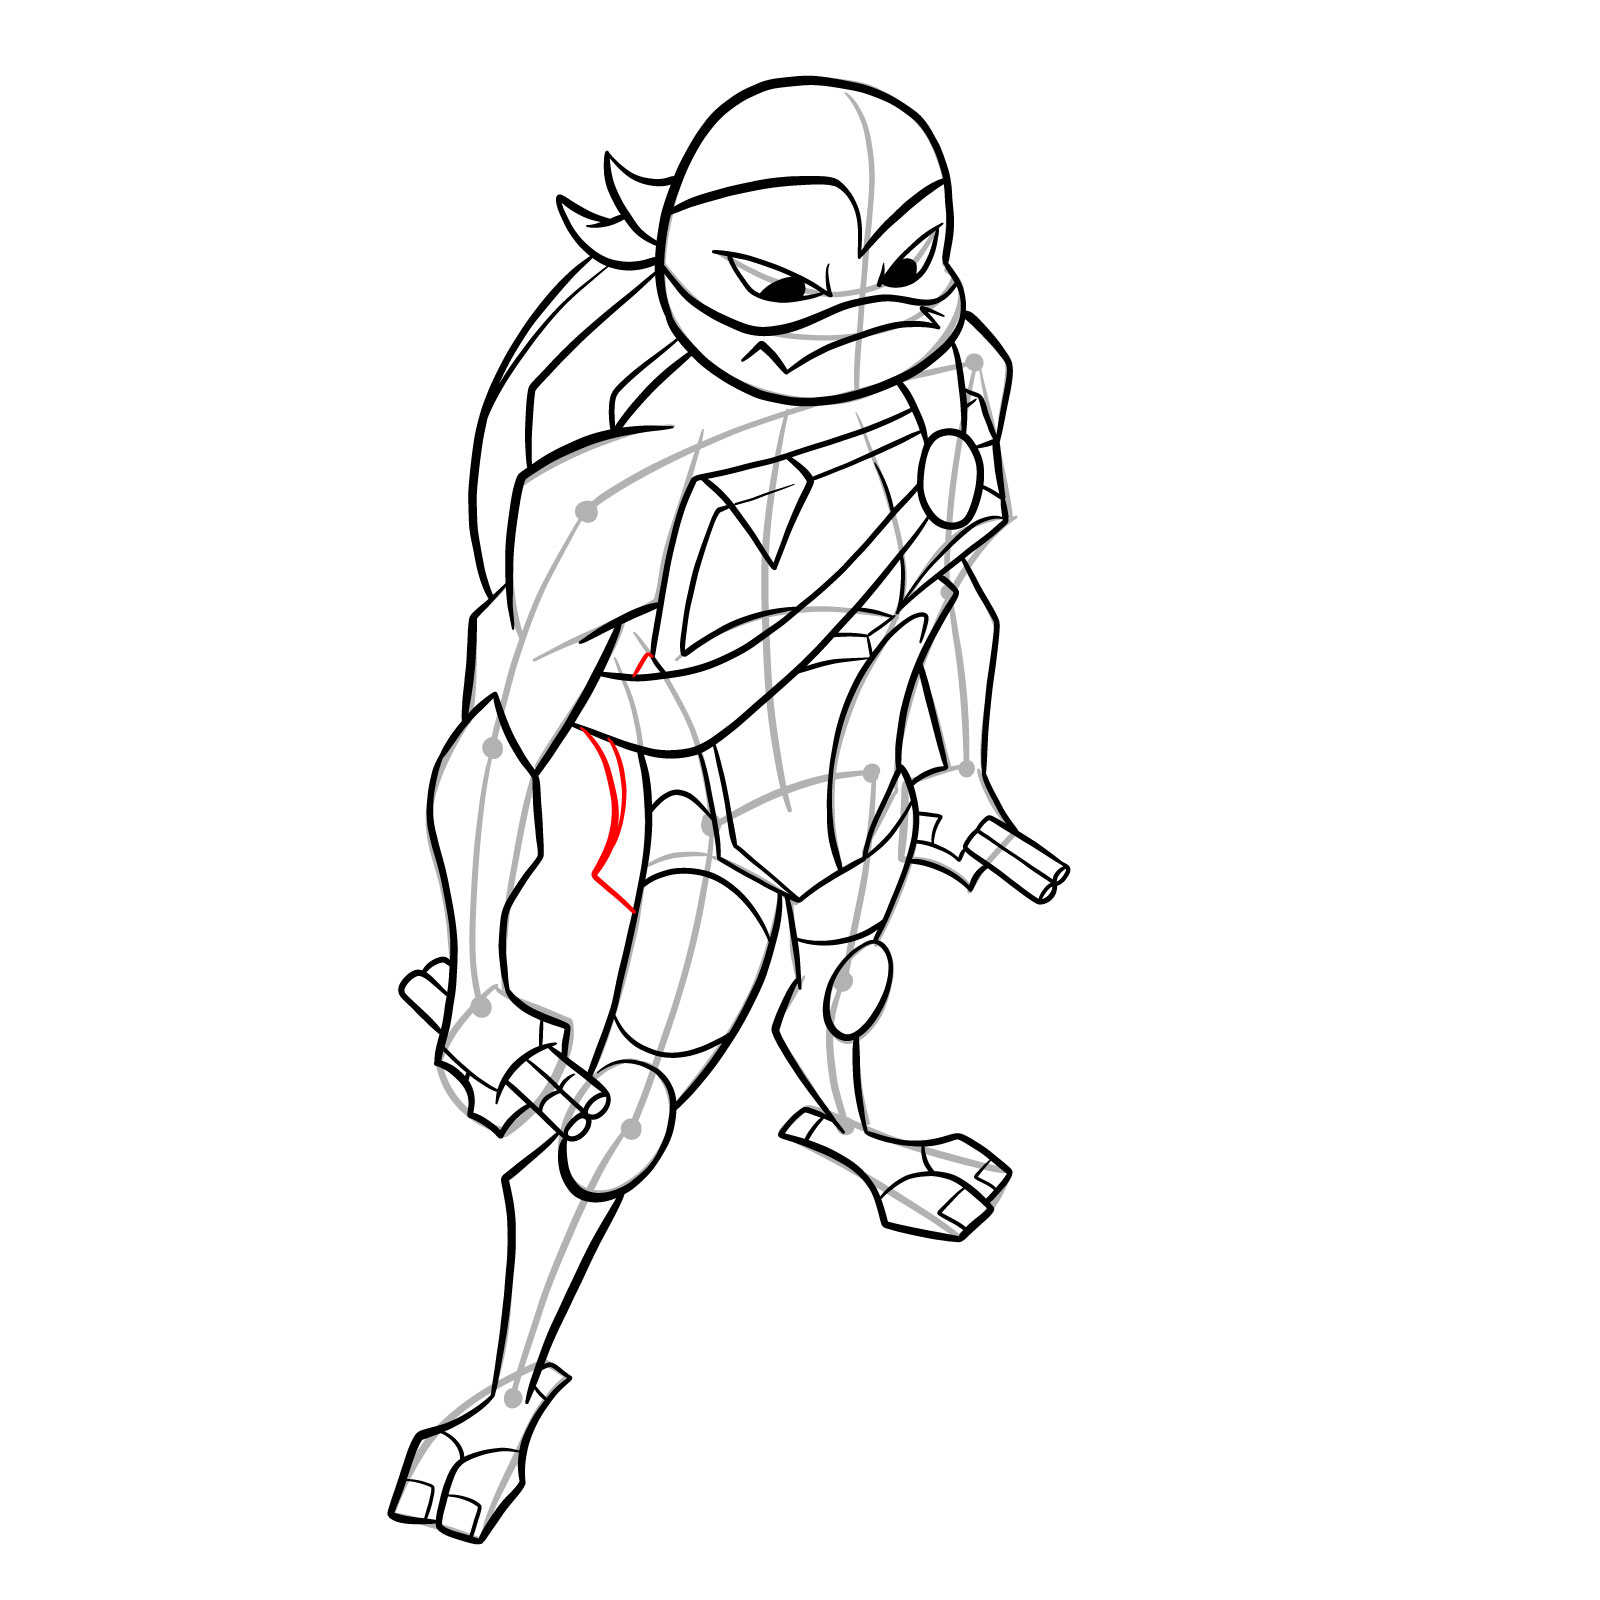 How to draw Mikey in Hamato Ninpō state - step 35